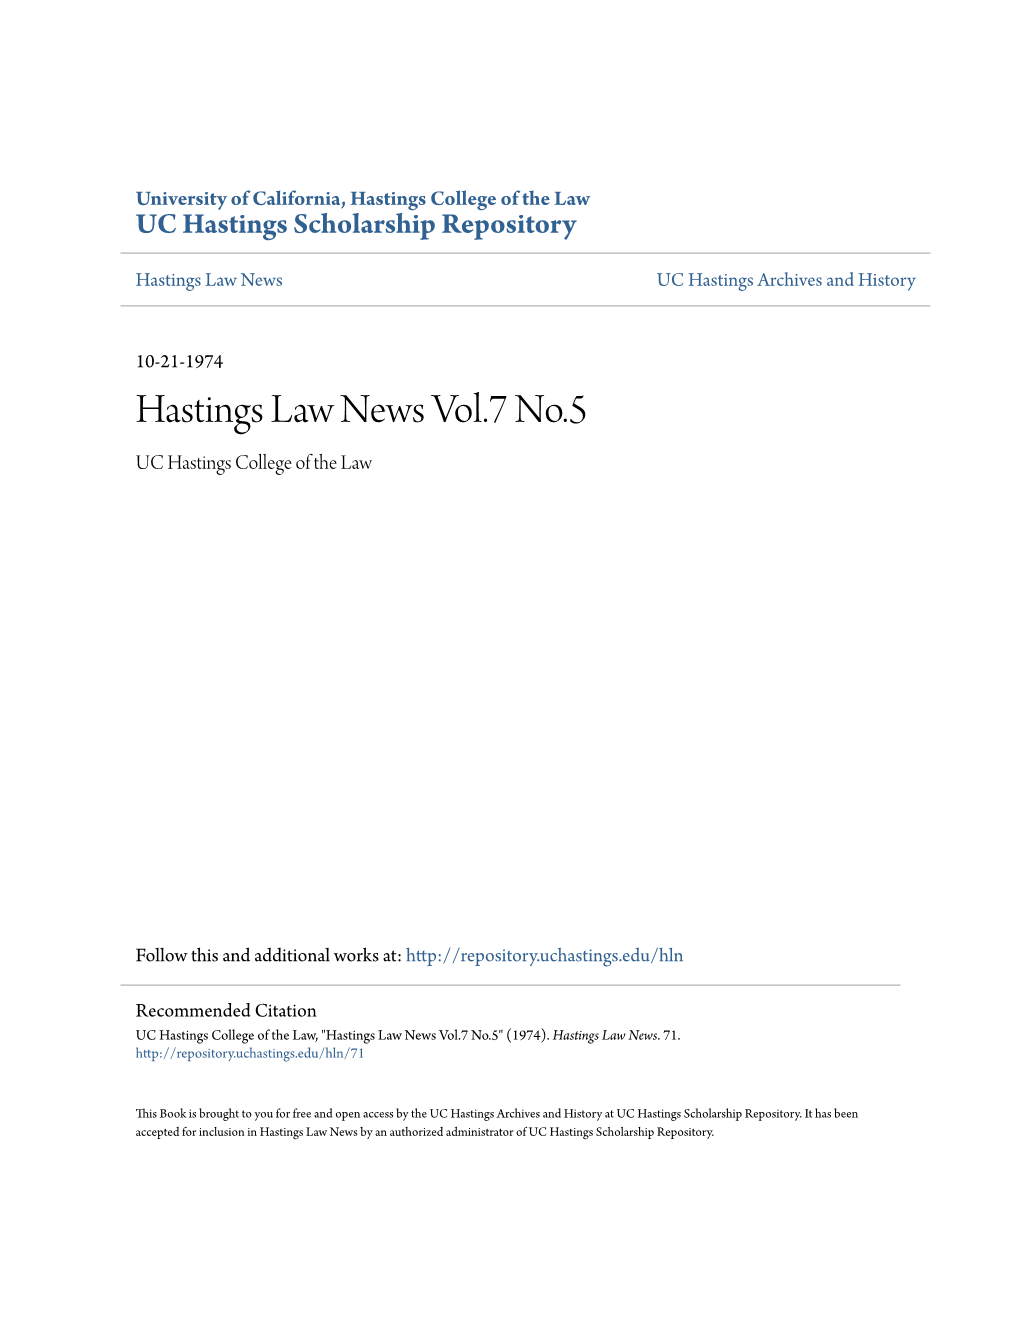 Hastings Law News Vol.7 No.5 UC Hastings College of the Law